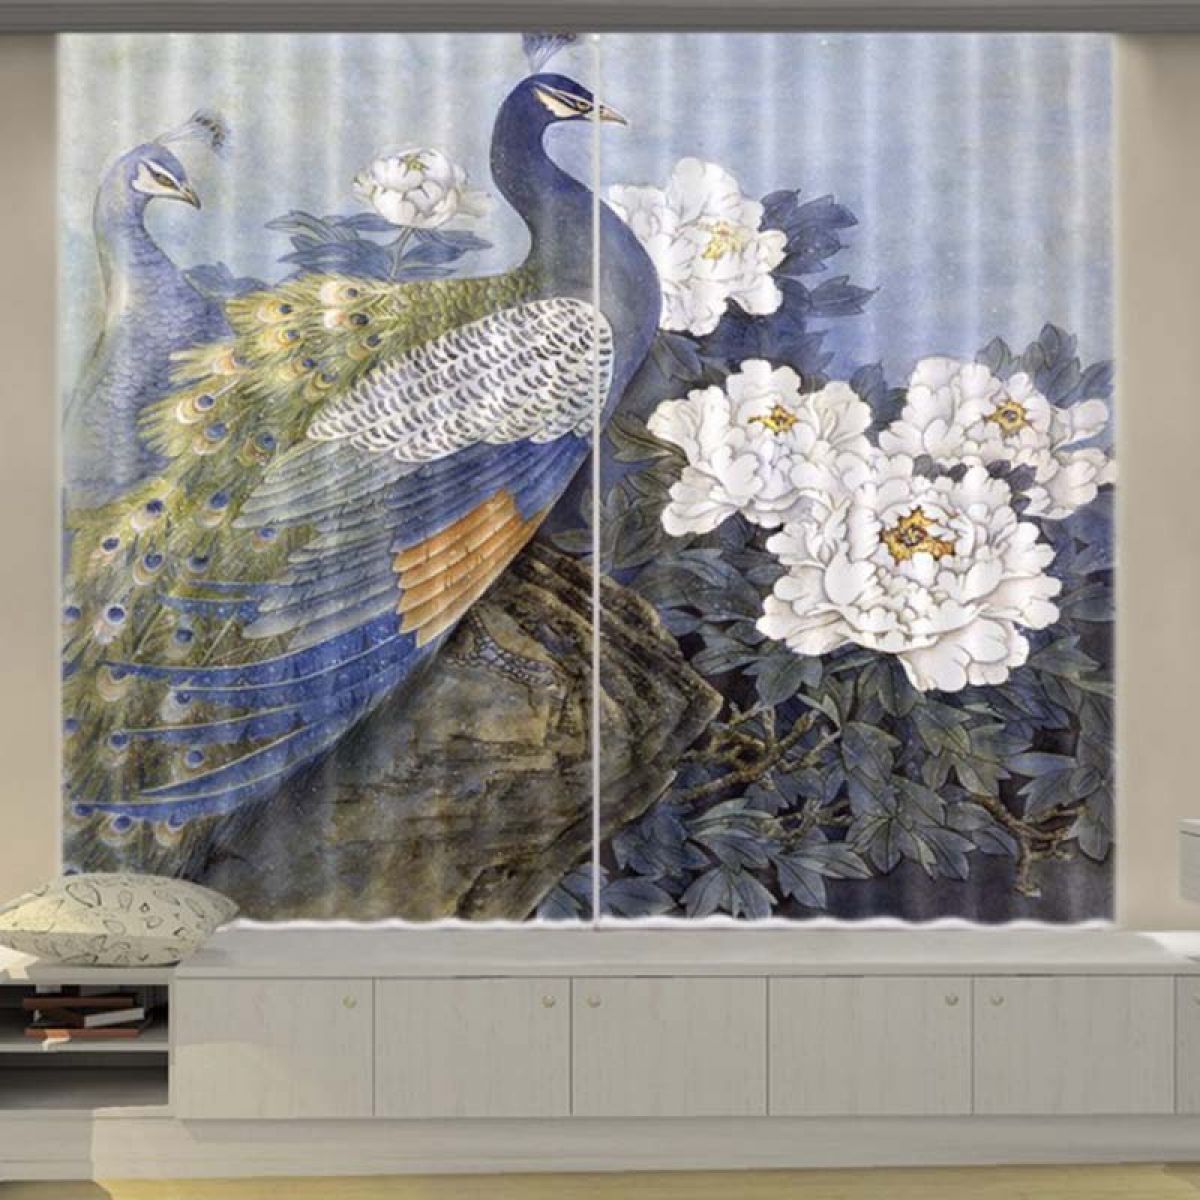 Modern 3d Peacock And Flowers Printed Window Curtain Home Decor